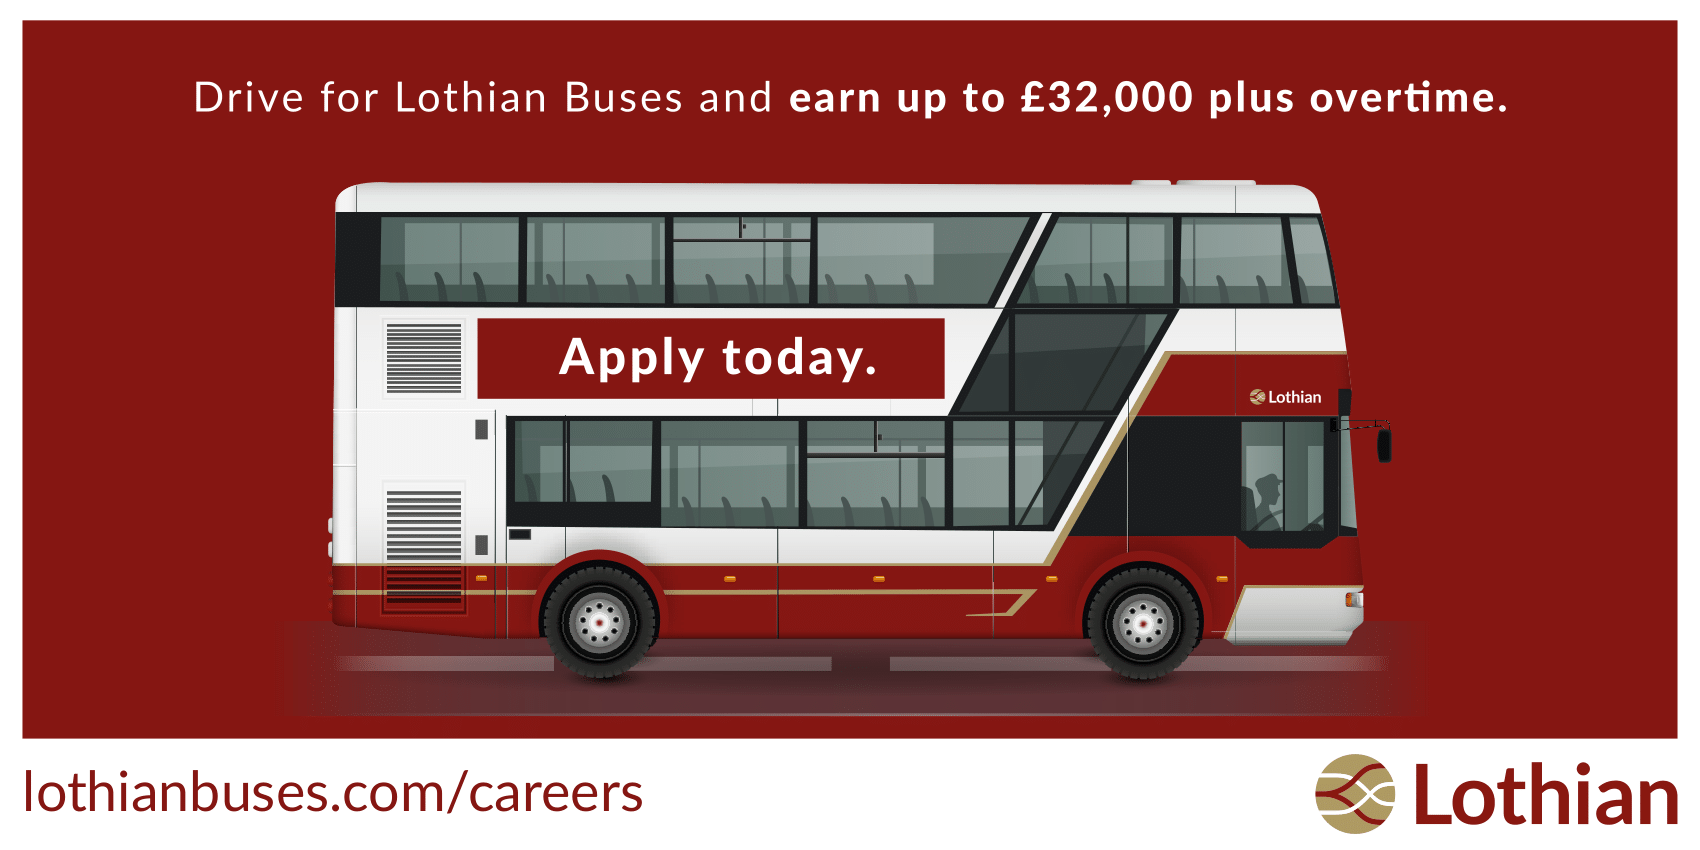 Drive for Lothian Buses — Apply Today